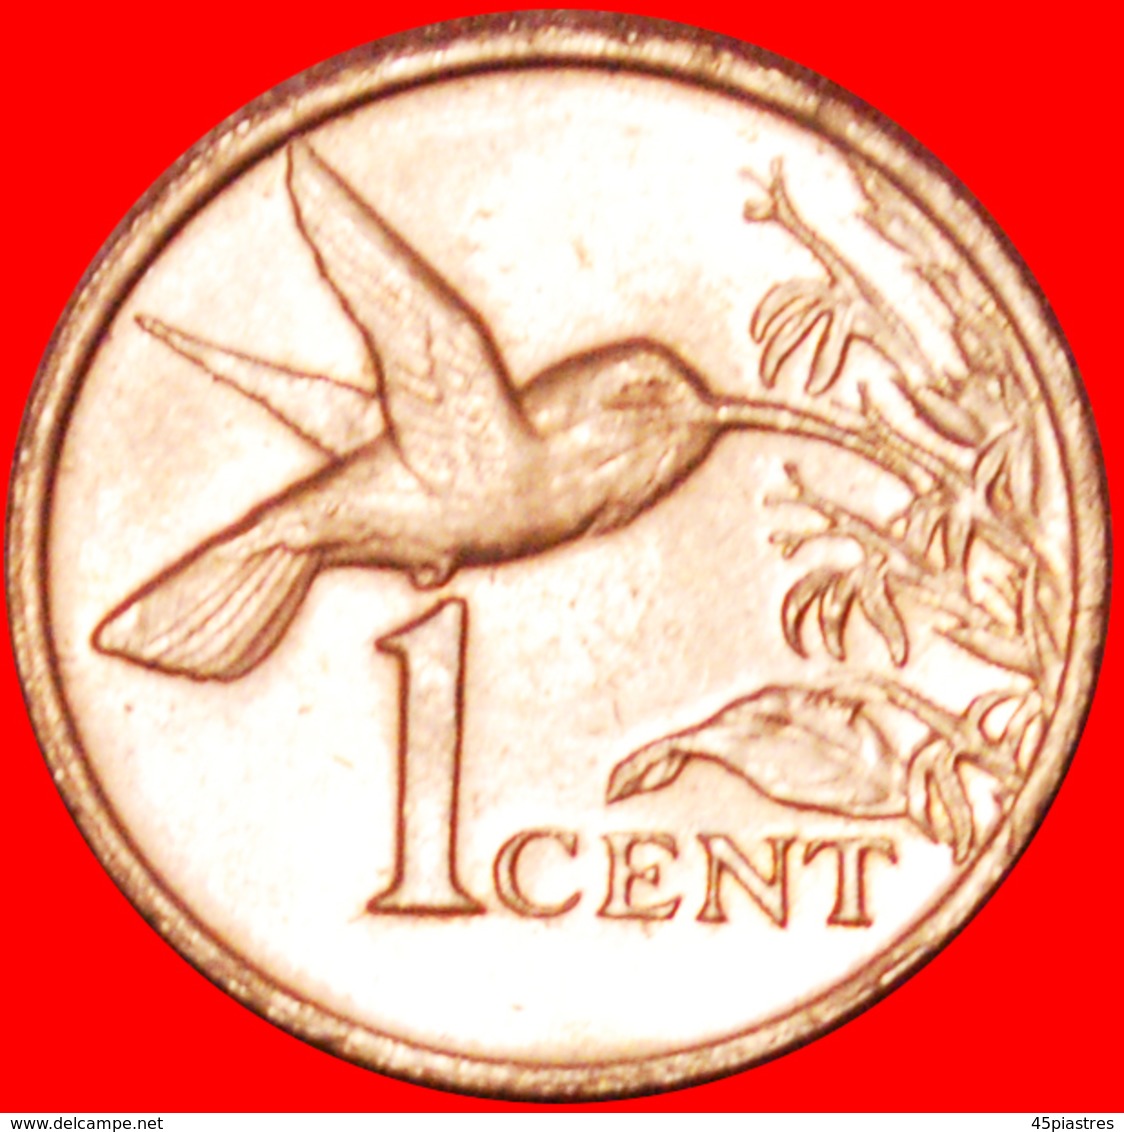 √ HUMMING-BIRD And 3 SHIPS: TRINIDAD AND TOBAGO ★ 1 CENT 1998 MINT LUSTER! LOW START ★ NO RESERVE! - Trinidad & Tobago